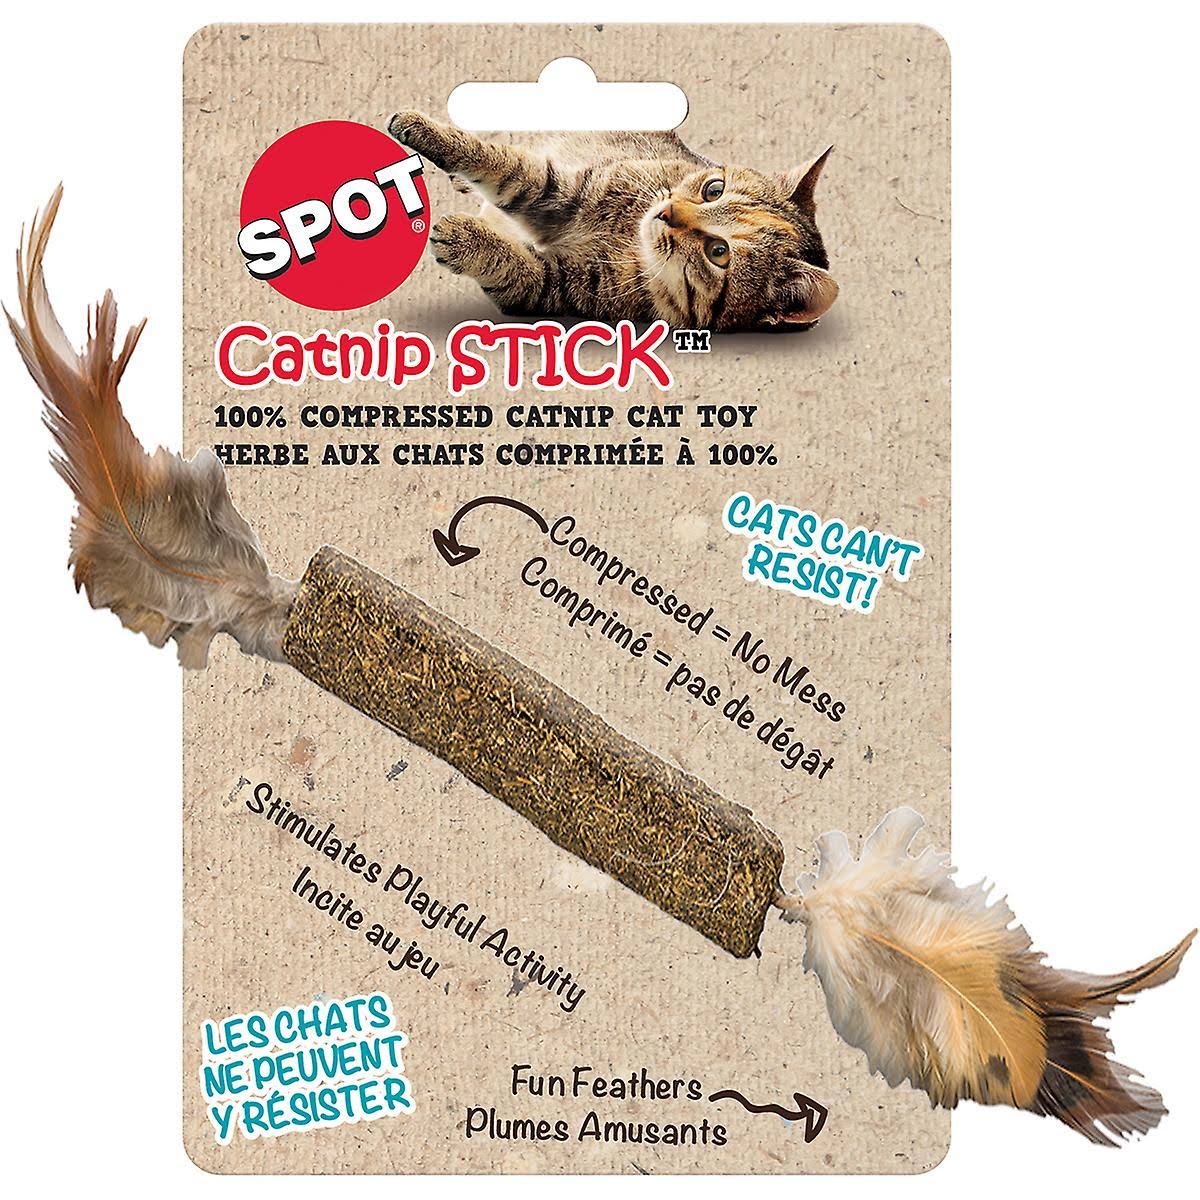 Ethical Pets Compressed Catnip Stick Cat Toy - Brown, 12"